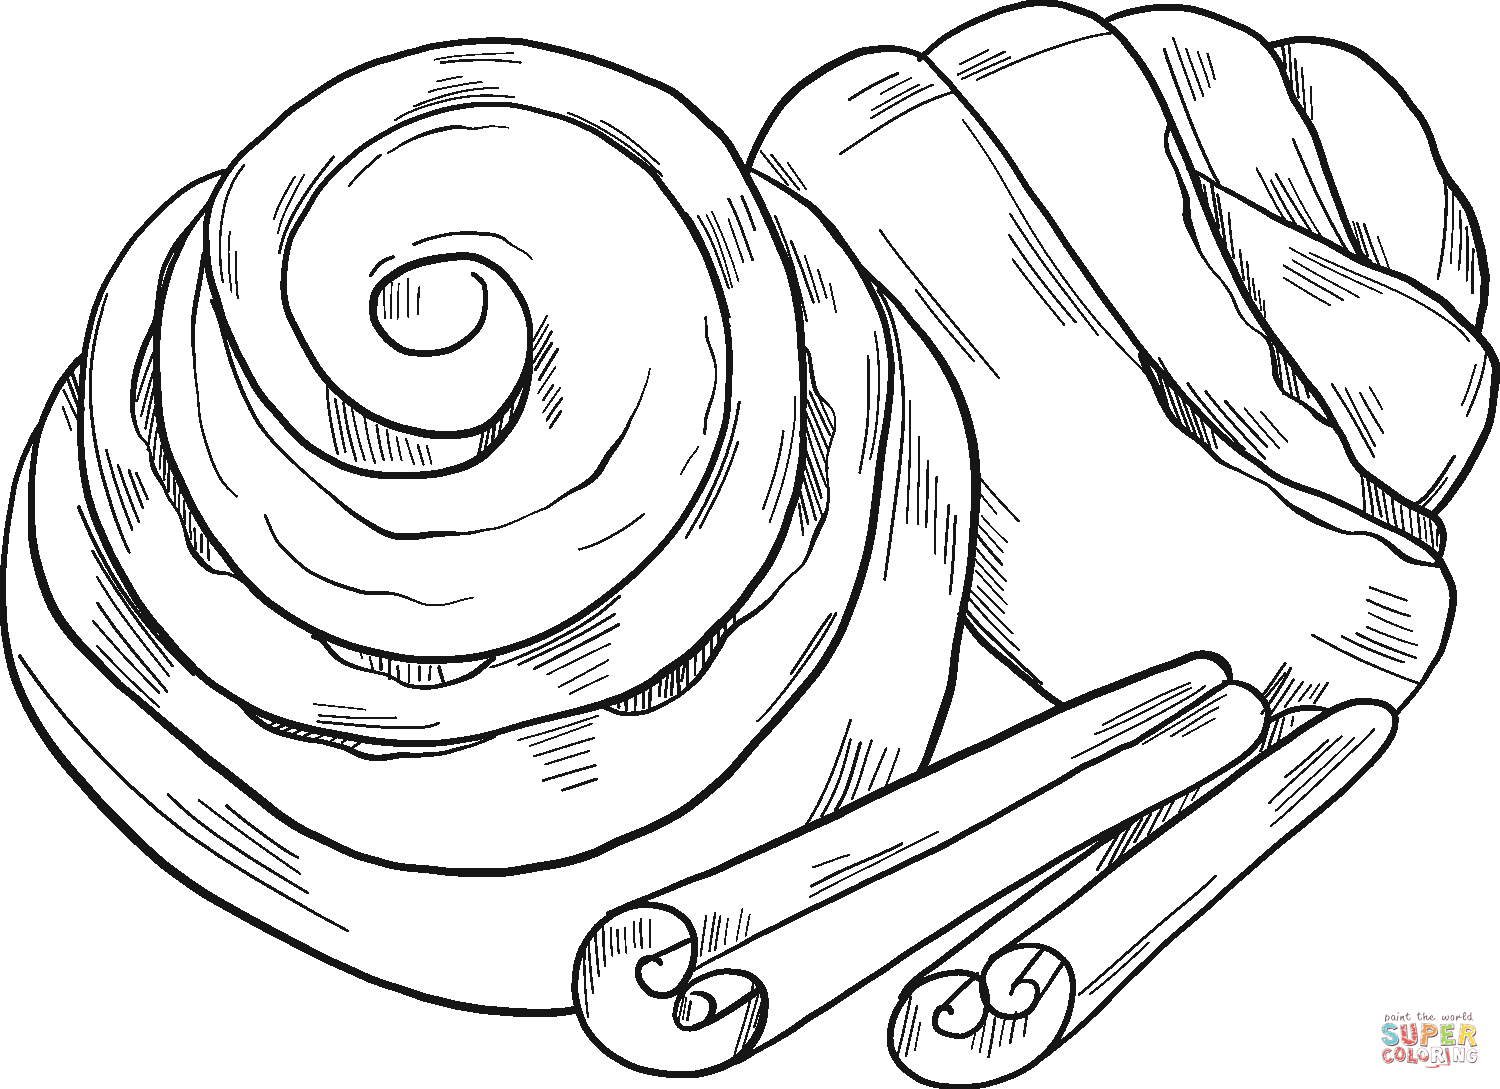 Cinnamon Rolls Coloring Page Free Printable Coloring Page Coloring Home